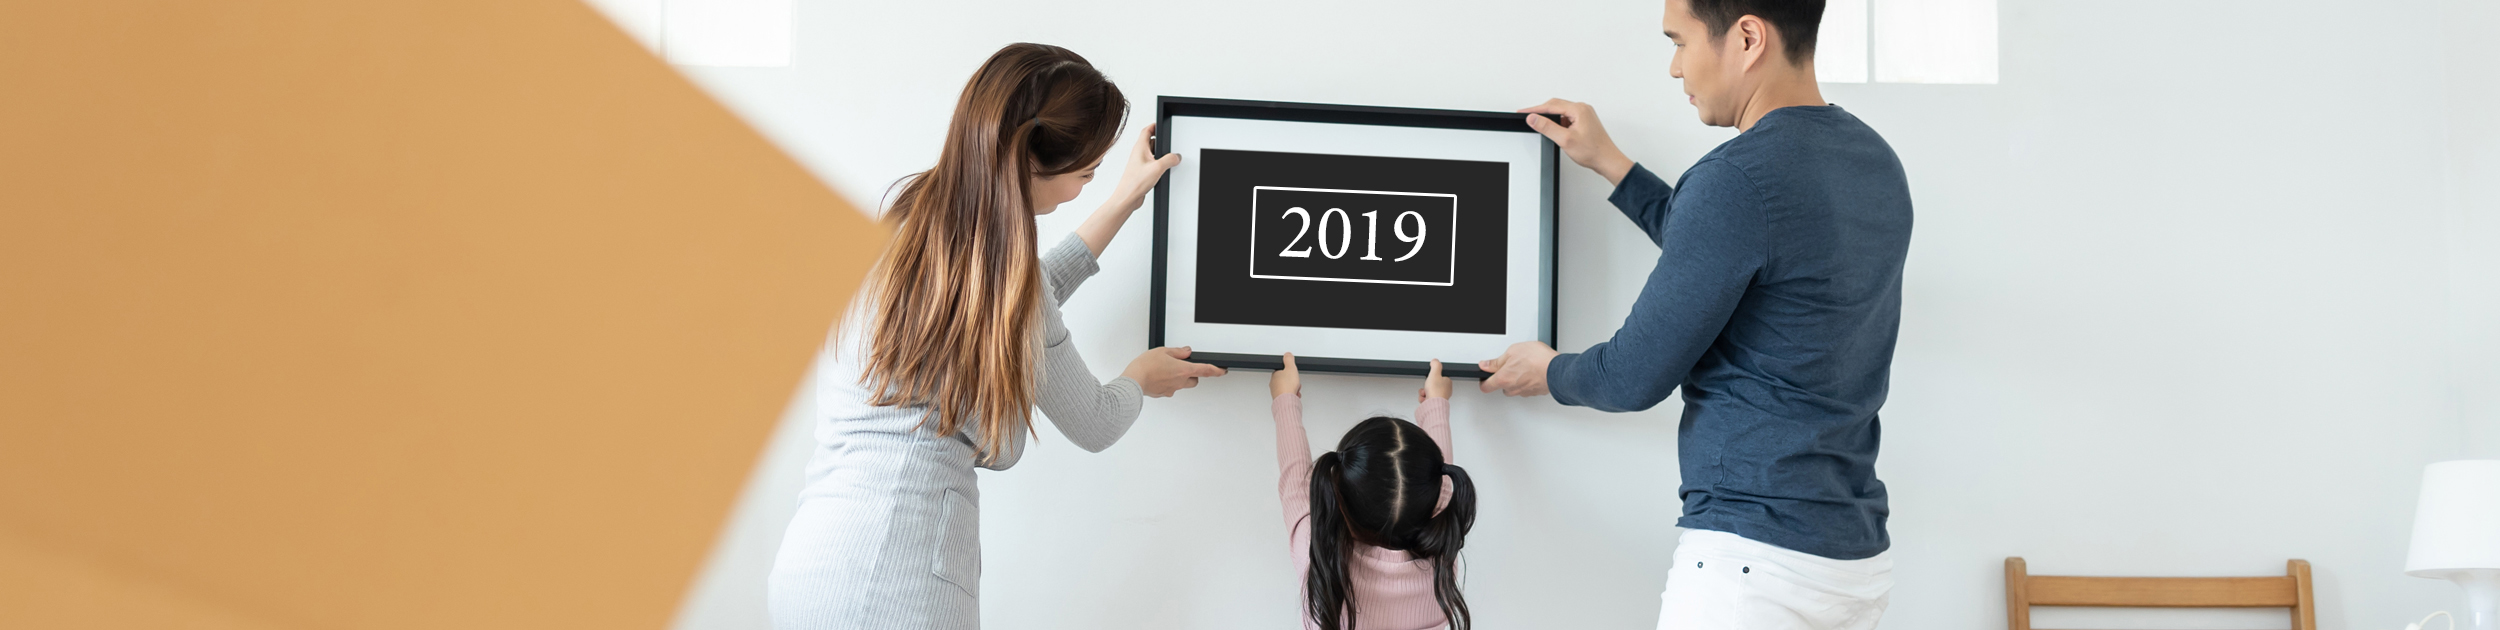 couple with young girl hanging a framed 2019 sign on the wall